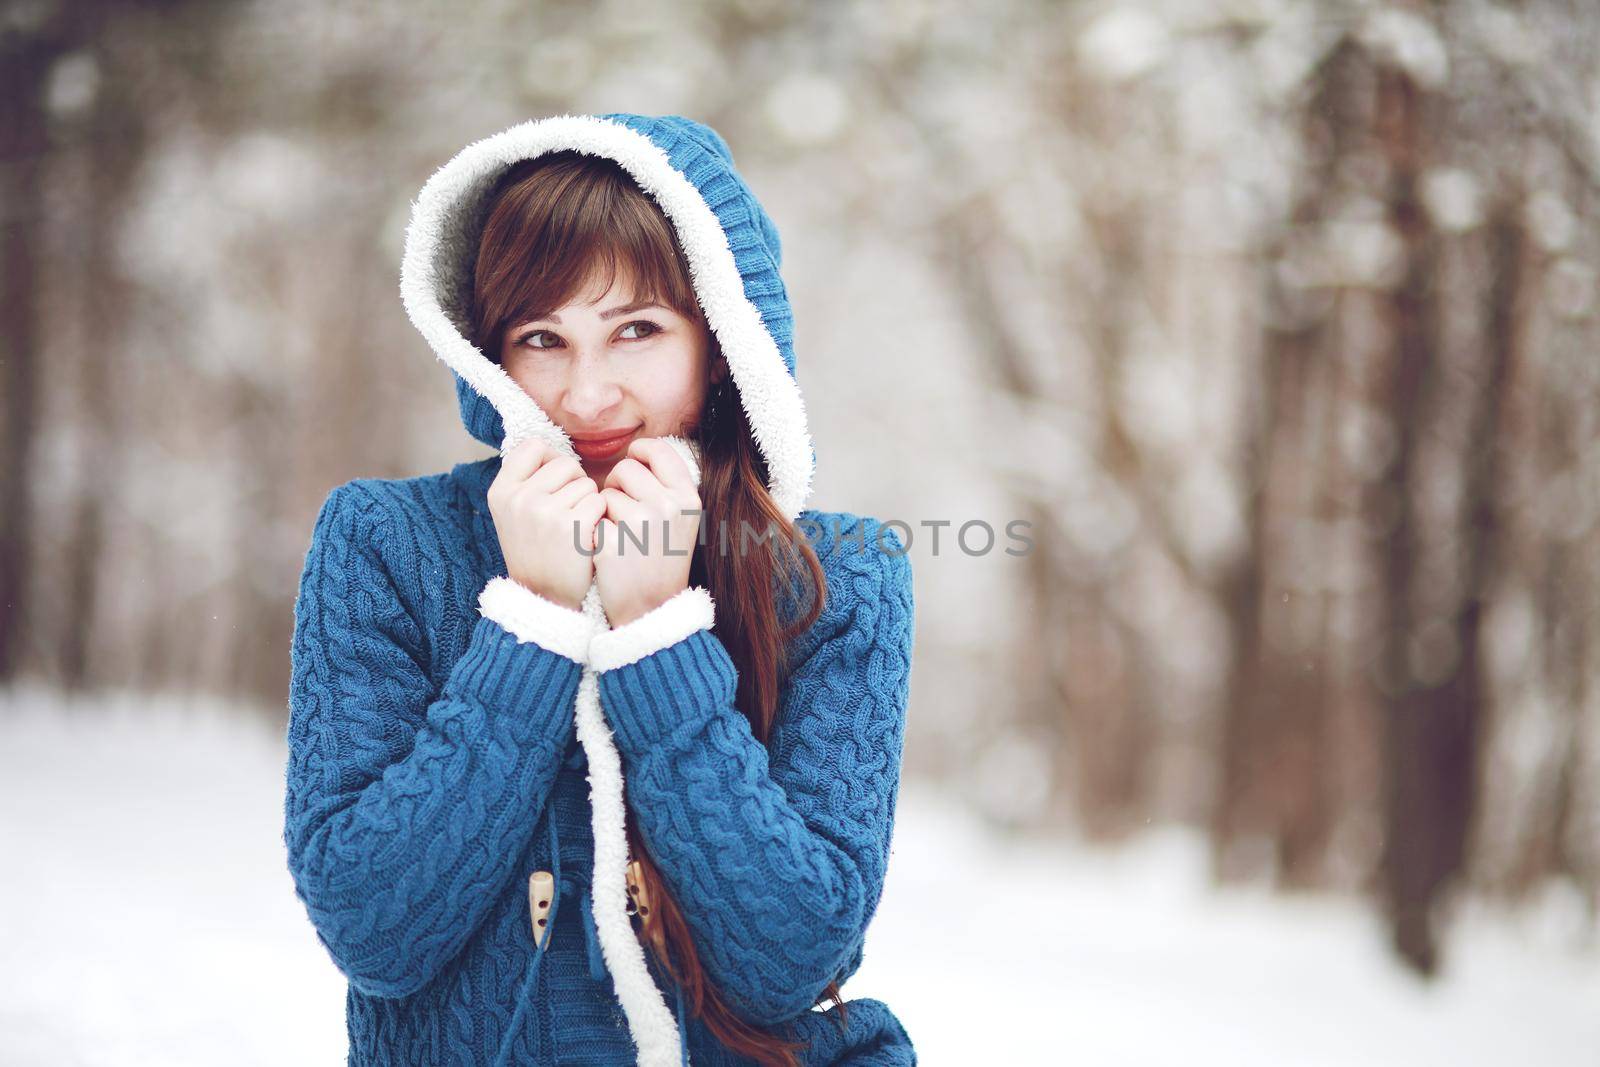 Winter portrait of a lovely girl in a blue sweater on the background of a snowy forest.